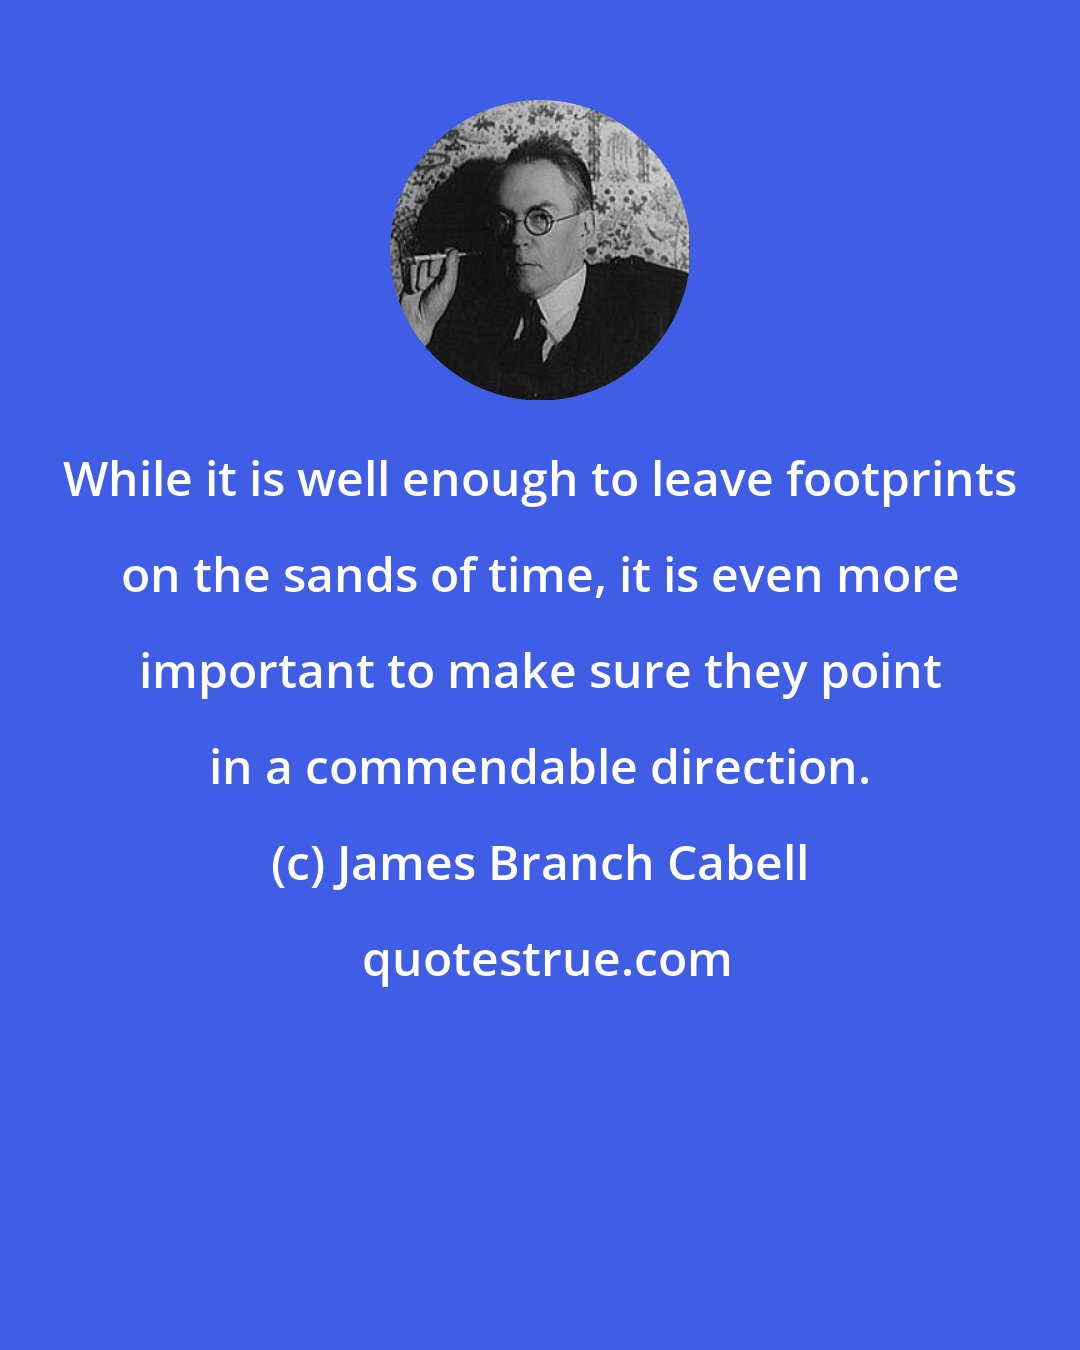 James Branch Cabell: While it is well enough to leave footprints on the sands of time, it is even more important to make sure they point in a commendable direction.